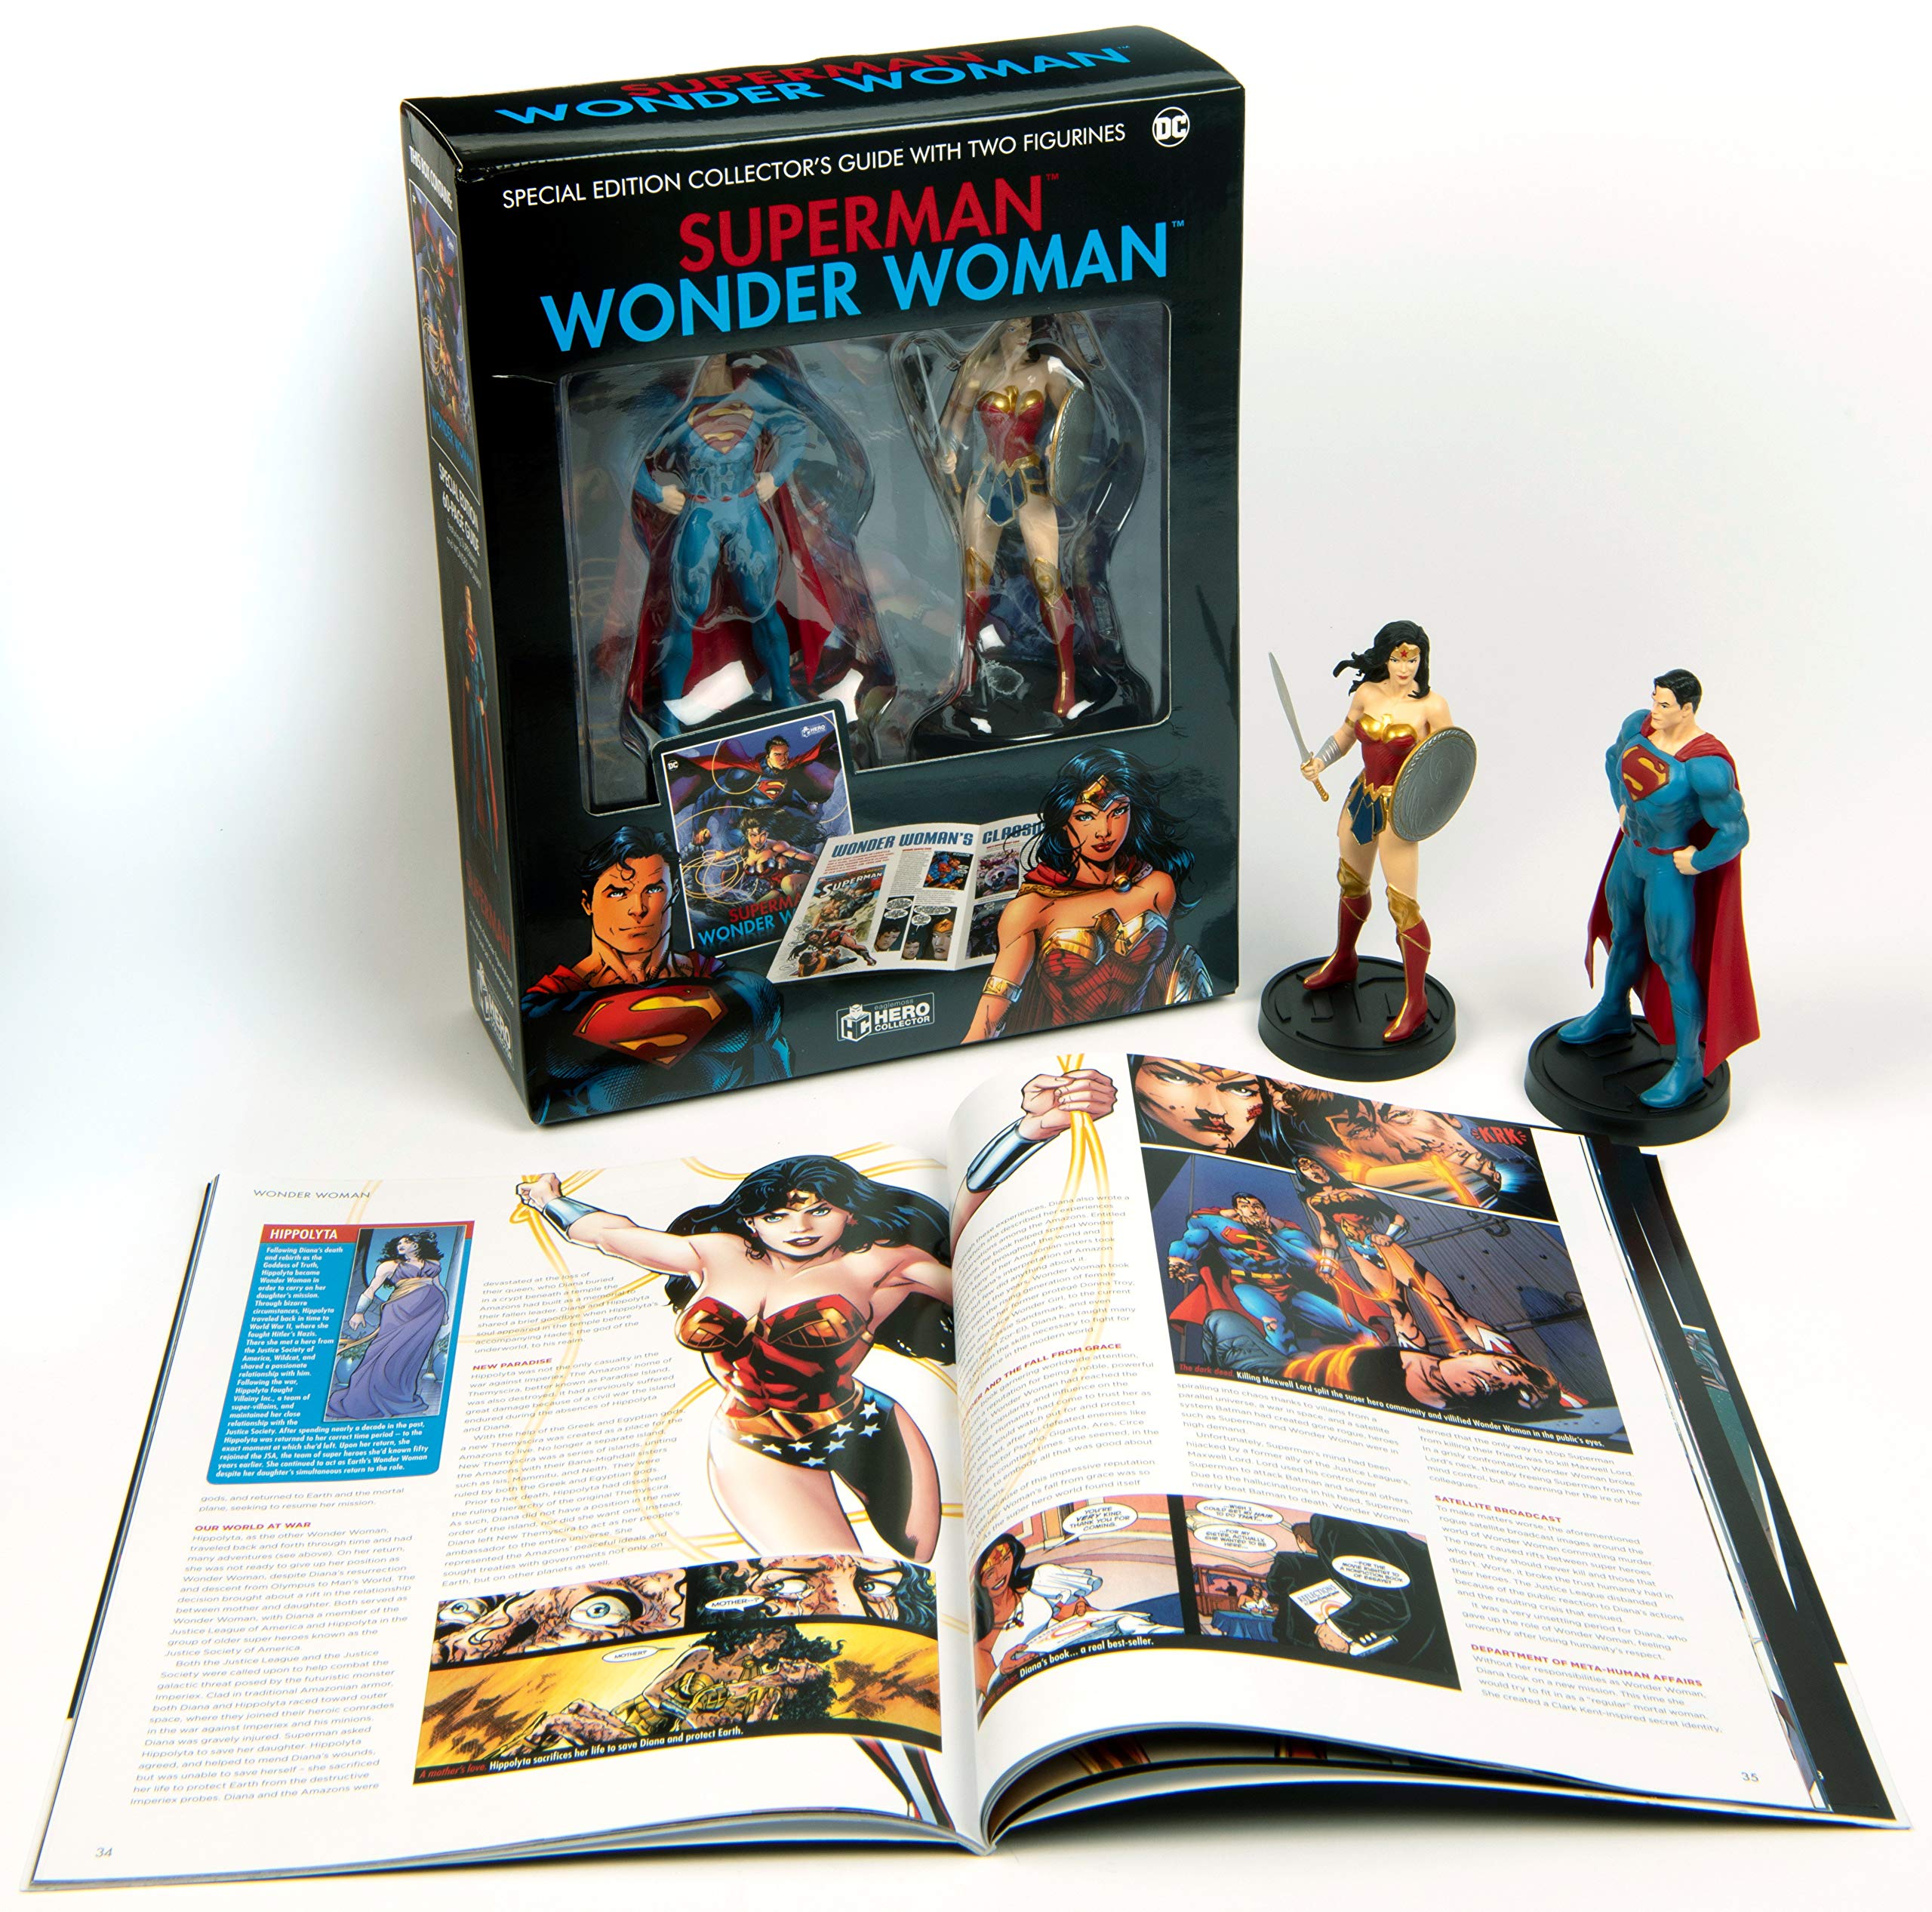 Superman and Wonder Woman Plus Collectibles | James Hill, James Andrews, Neal Bailey, Jake Black, Matthew Manning